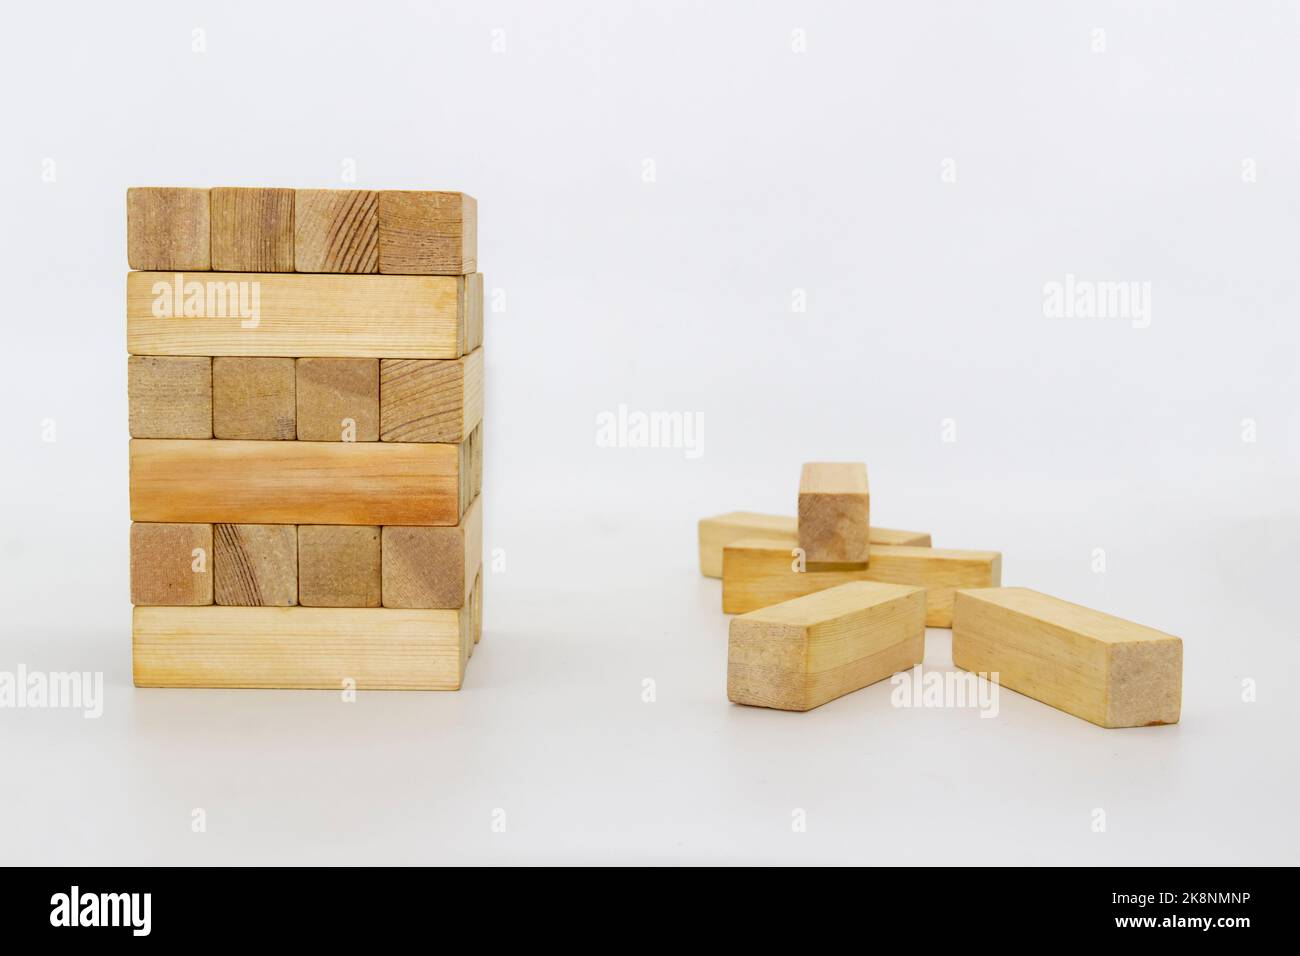 Tower wooden block, builds tower from wooden blocks against white background. The wooden bricks lying around randomly Stock Photo